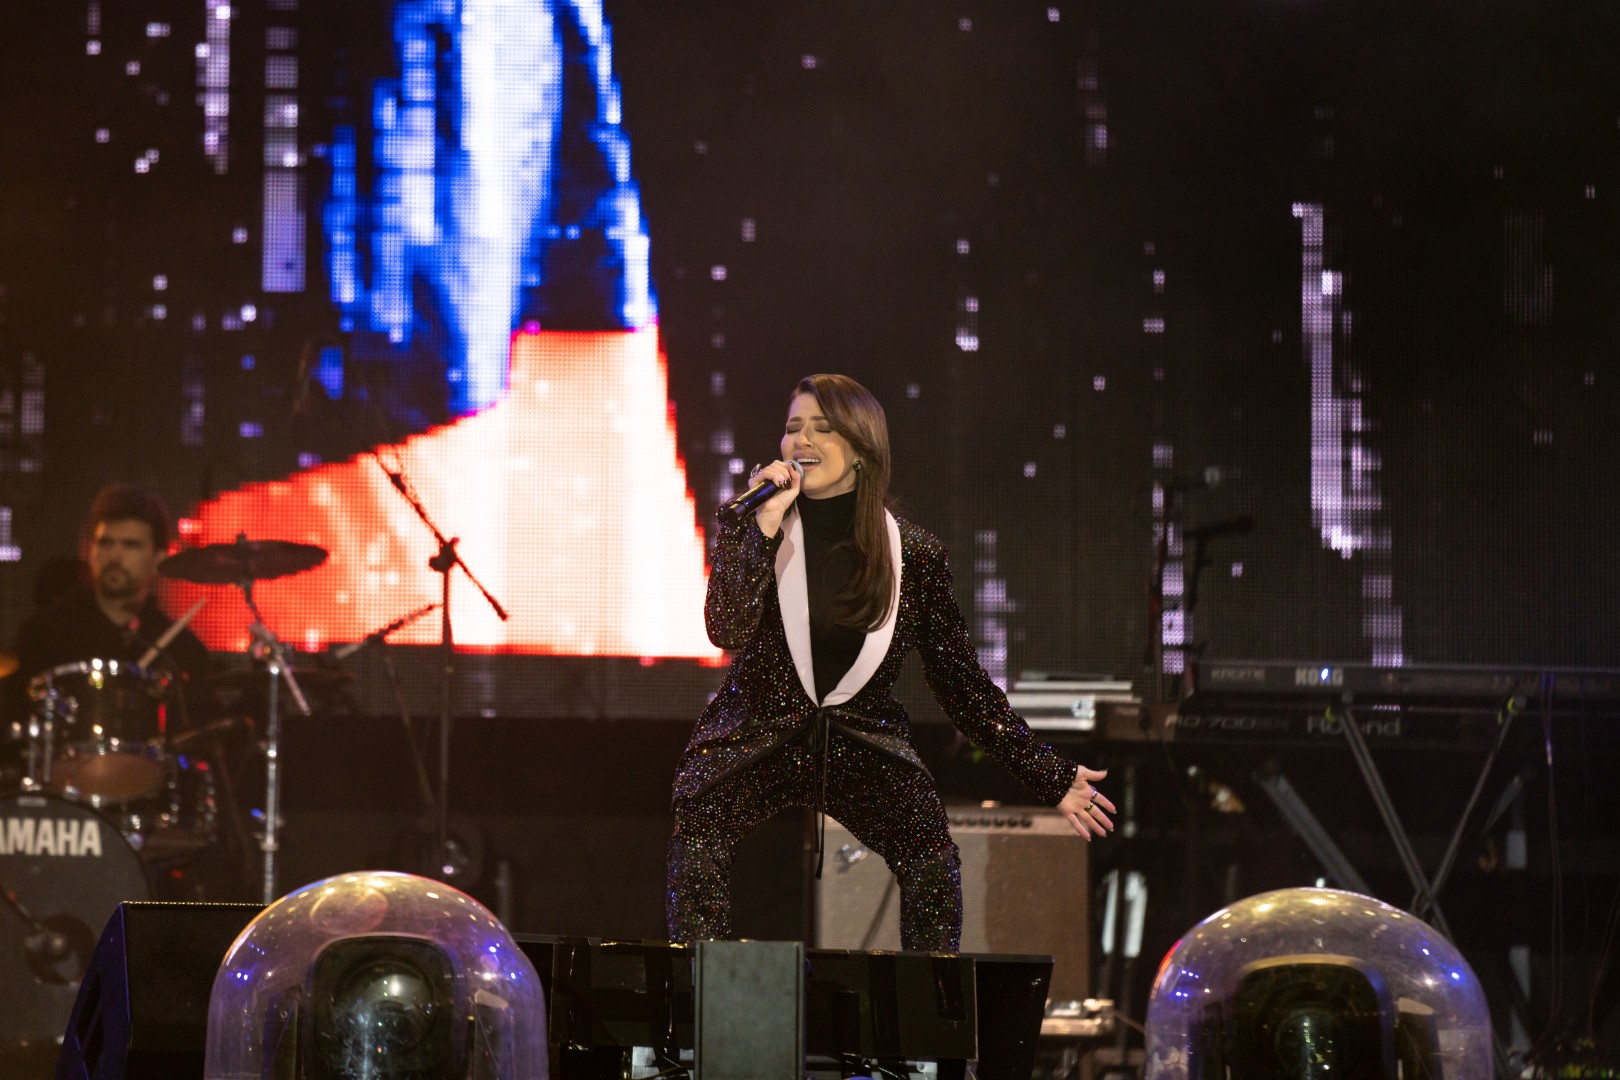 Lidia Buble at National Arena in Bucharest on March 12, 2022 (5e2a6b3455)